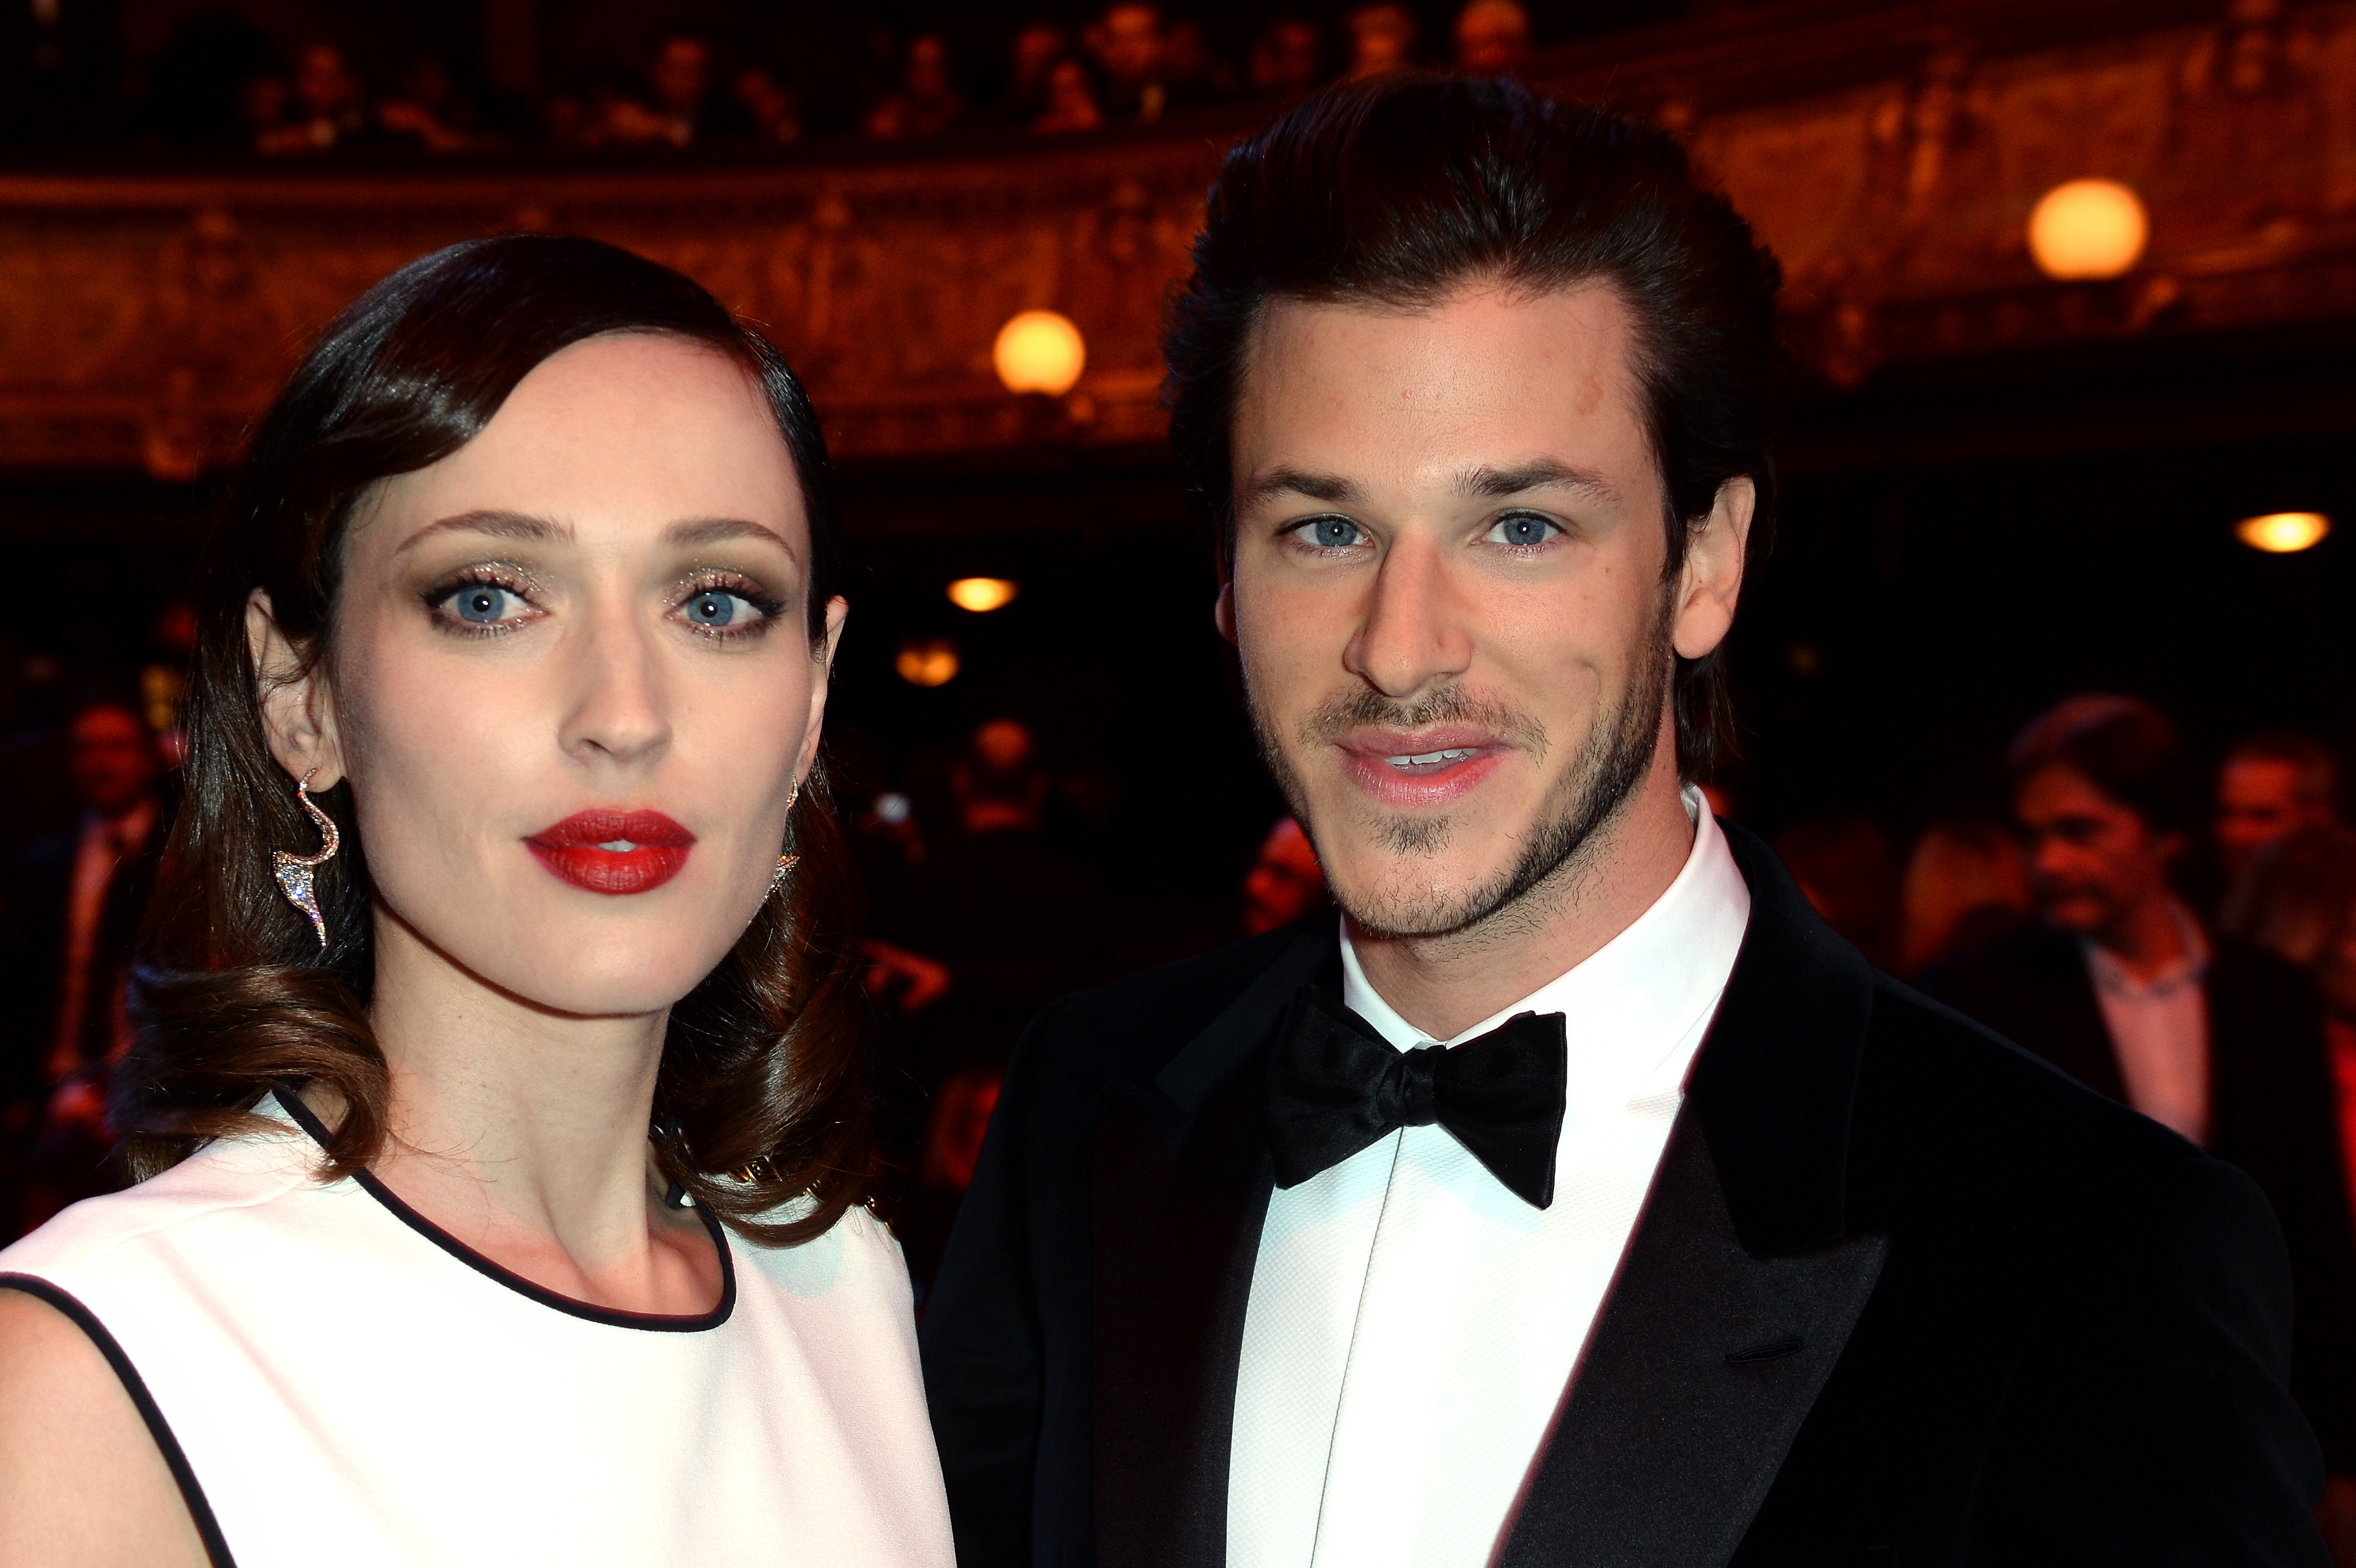 Gaelle Pietri and Gaspard Ulliel at the 40th César Film Awards 2015 Ceremony on February 20, 2015, in Paris, France. | Source: Getty Images